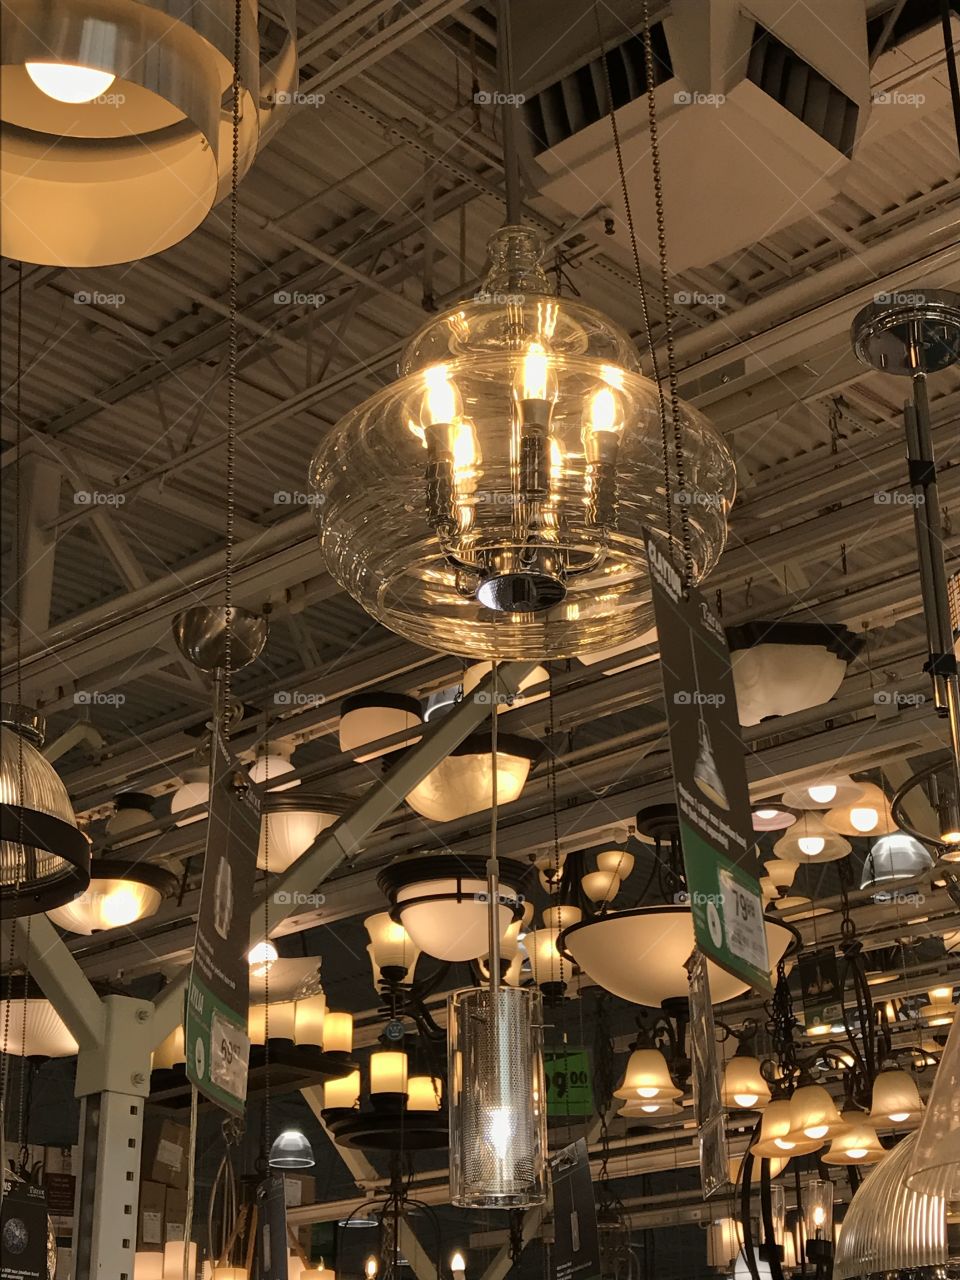 Lights hanging for sale in the hardware store 